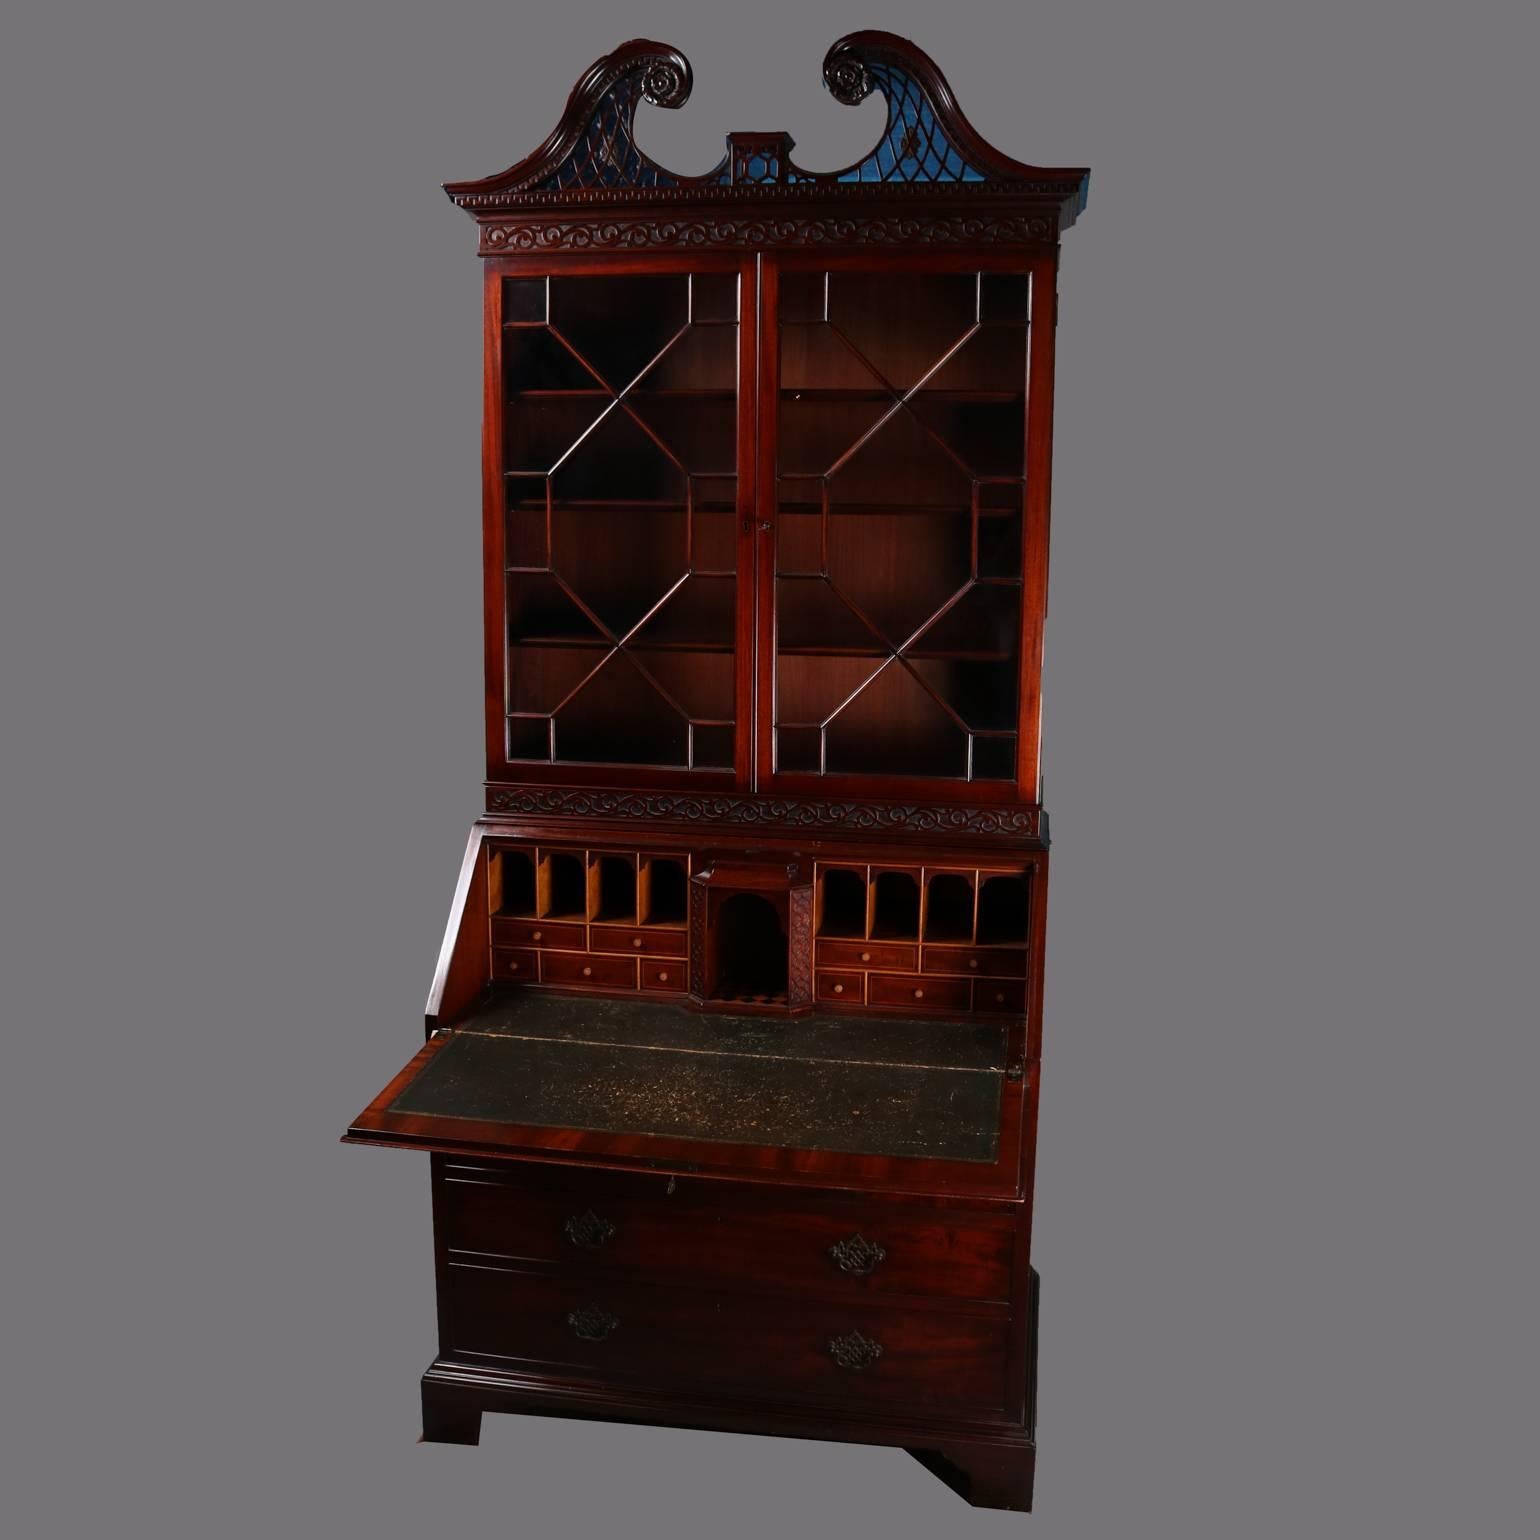 Antique Federal mahogany secretary features the top section a double glass door cabinet bookcase topped with broken-arch filigree pediment and two pull-out candle stands; the base section a slant-top desk opening to leather writing surface with